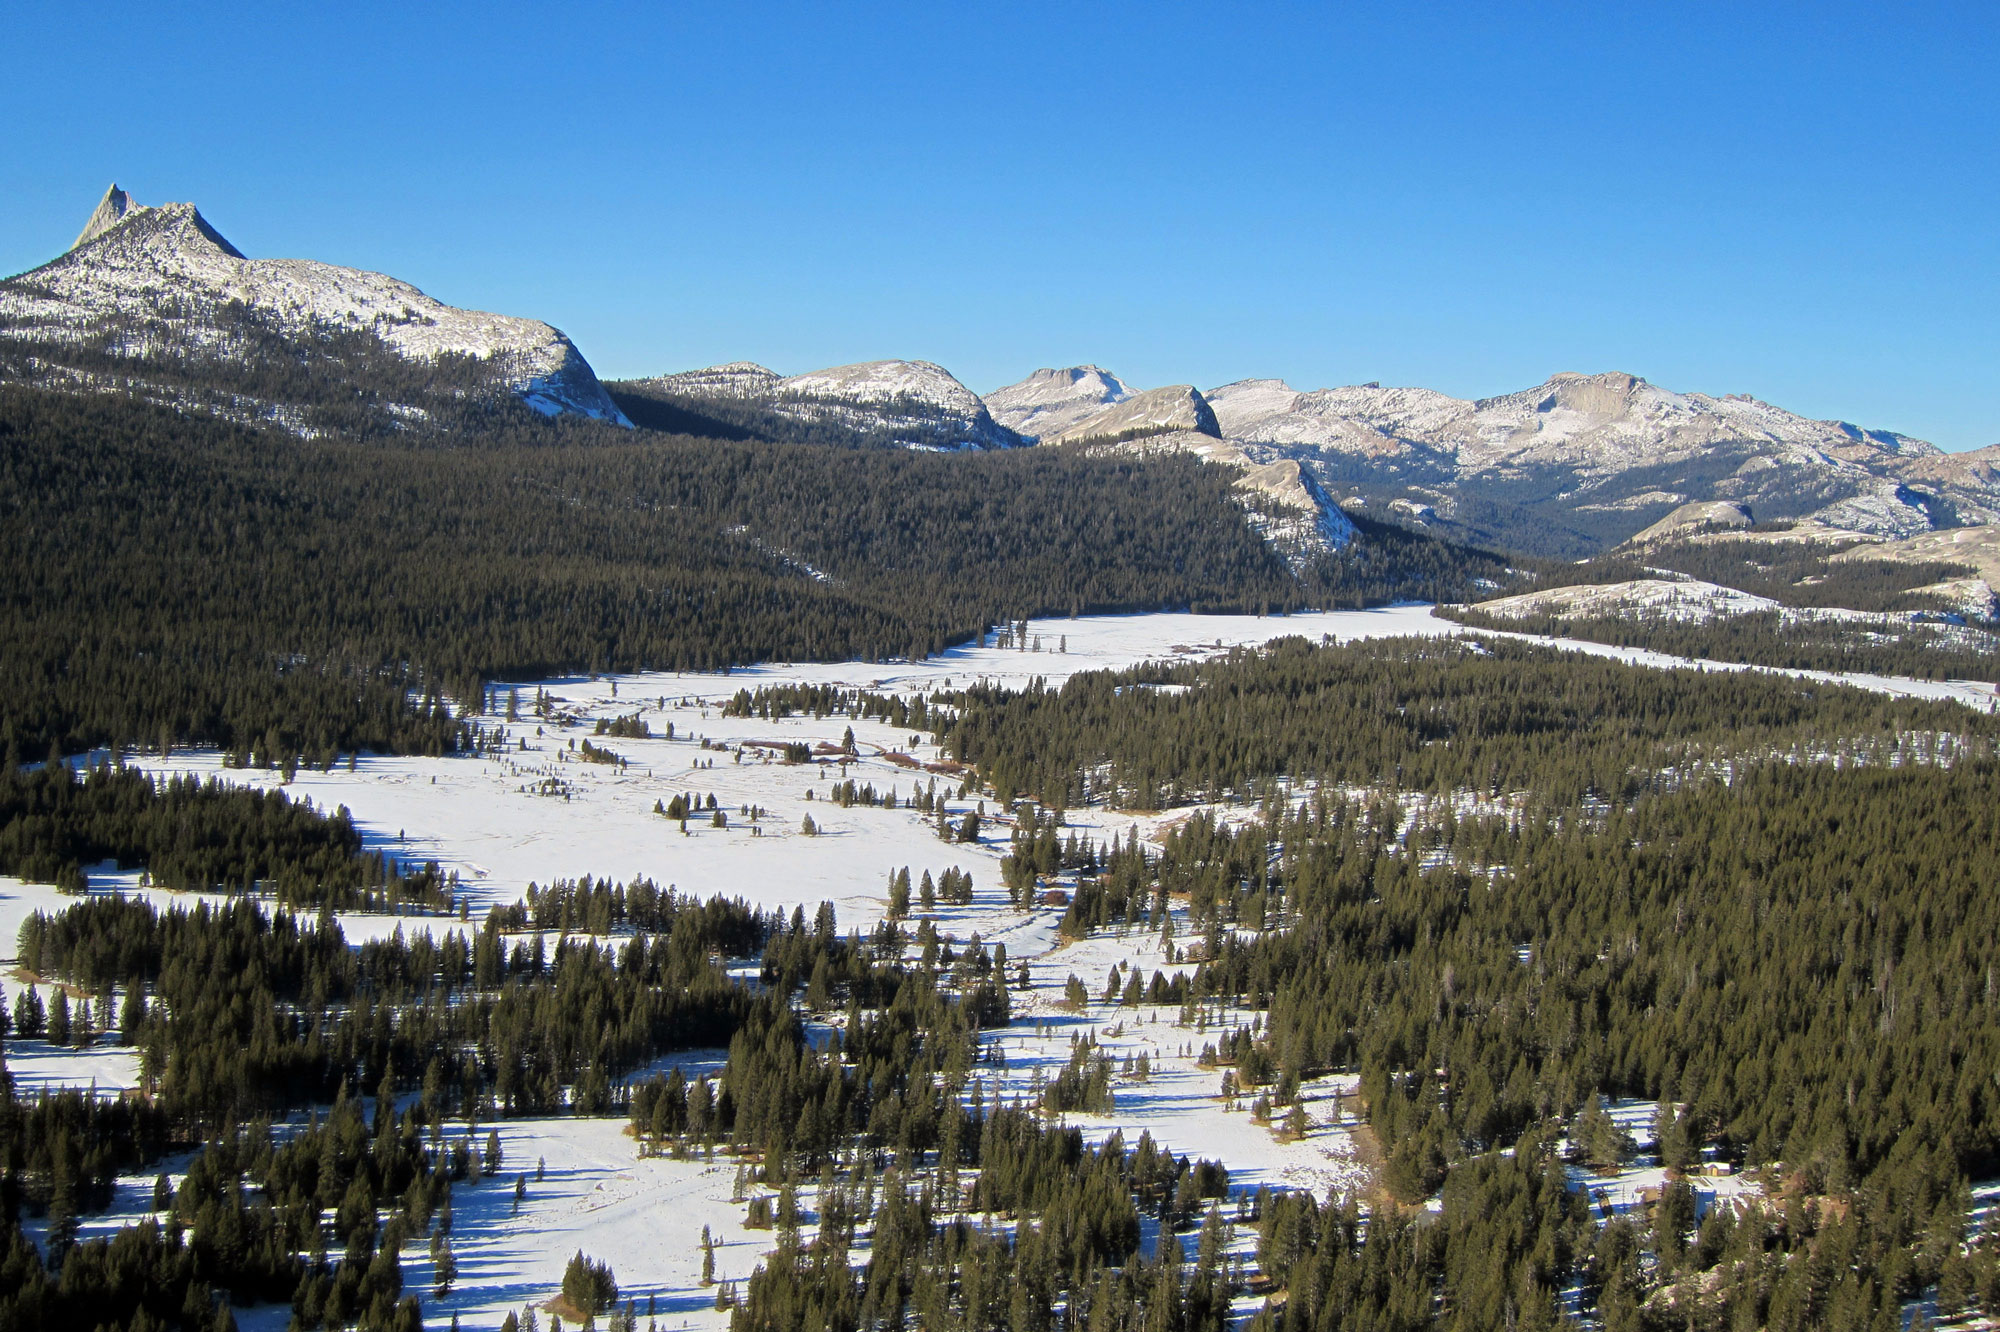 Tuolumne-Meadows-from-Lembert-Dome-on-January-4,-2014